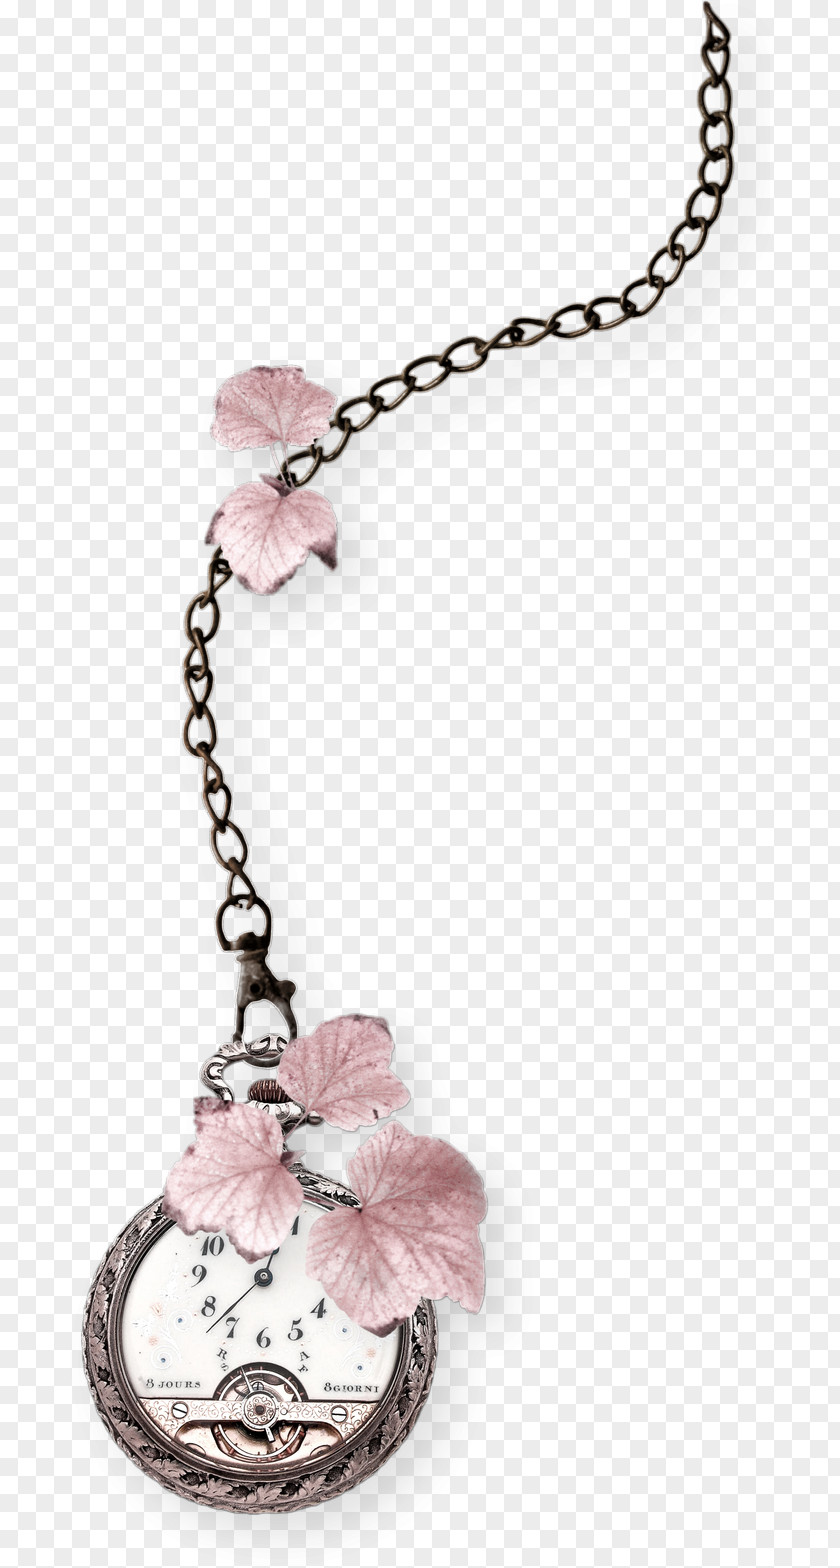 Petal Chain Pocket Watch Jewellery Clothing Accessories PNG